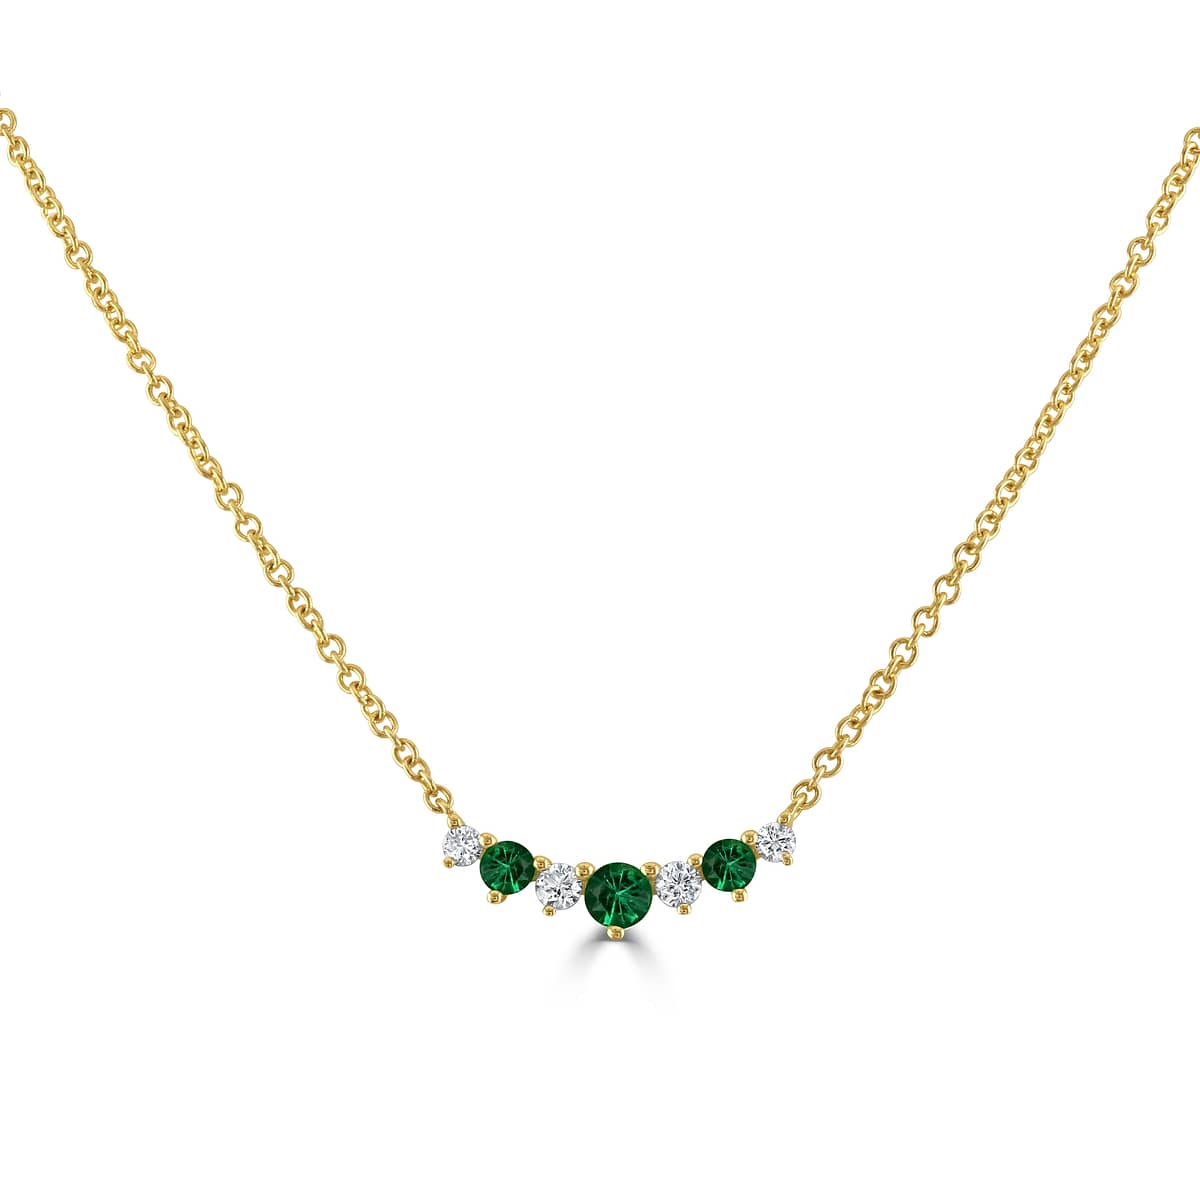 Weir Collection 18k yellow gold diamond and emerald tiara necklace